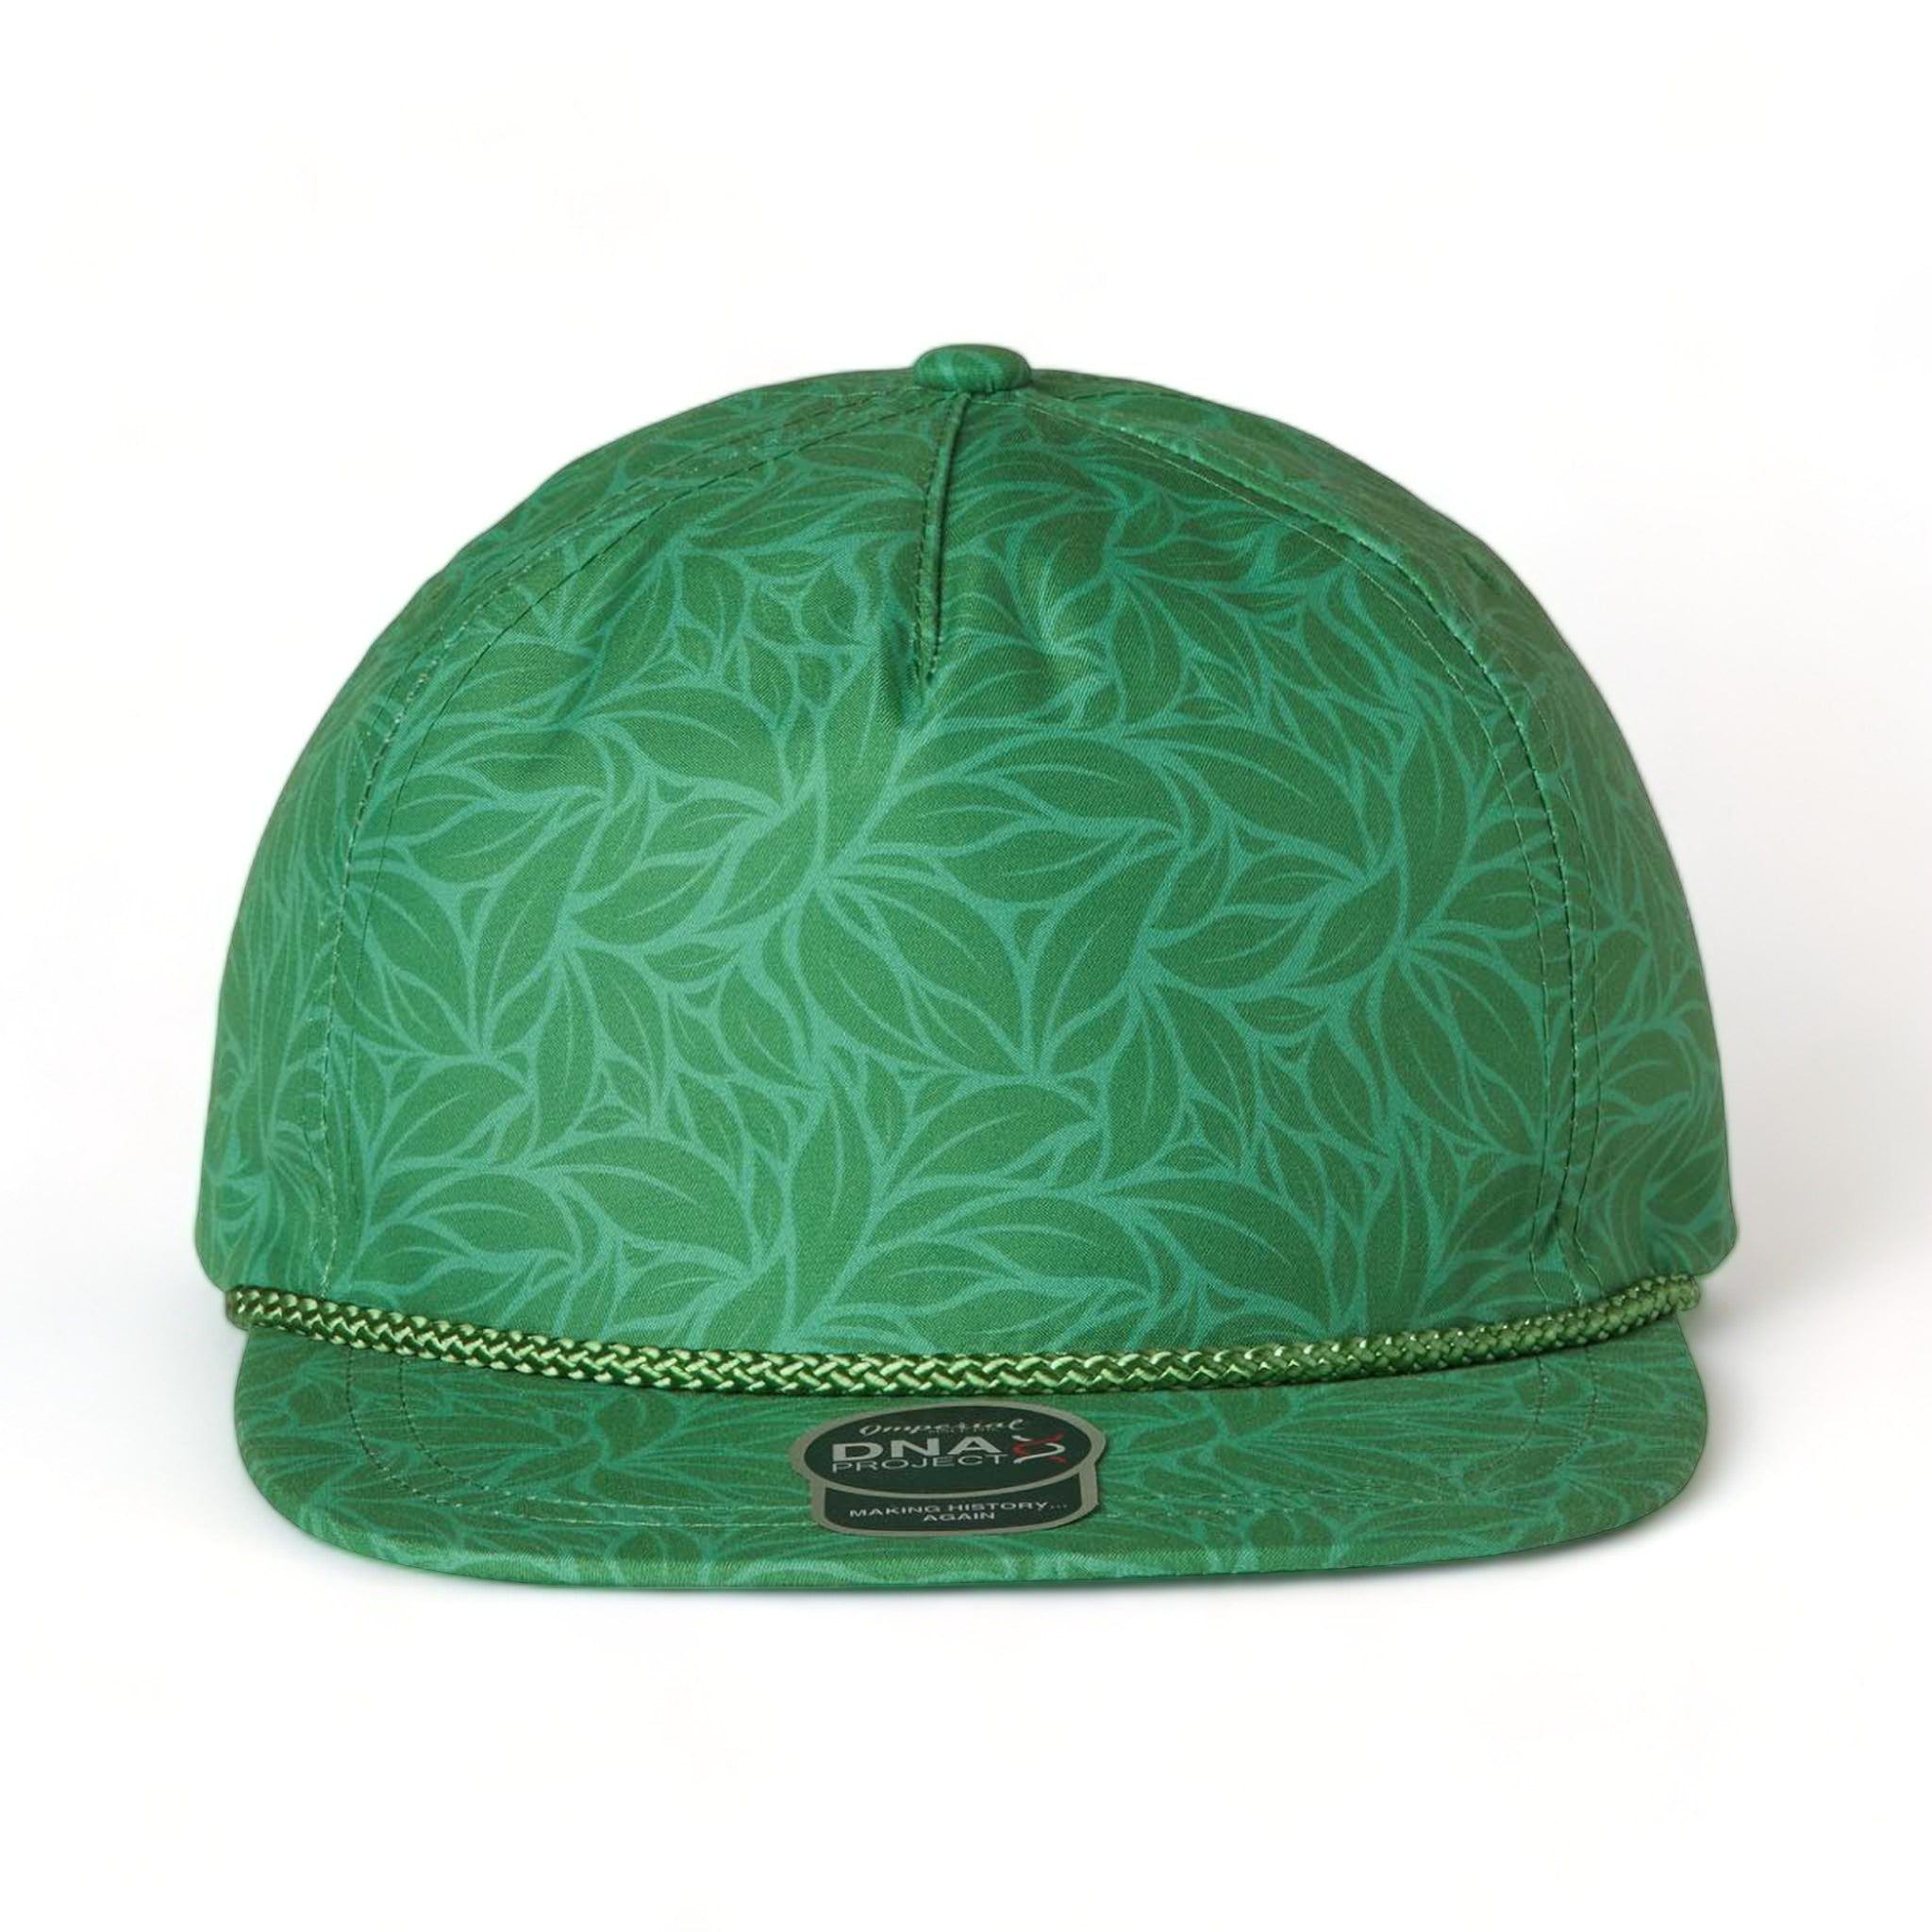 Front view of Imperial DNA010 custom hat in green floral